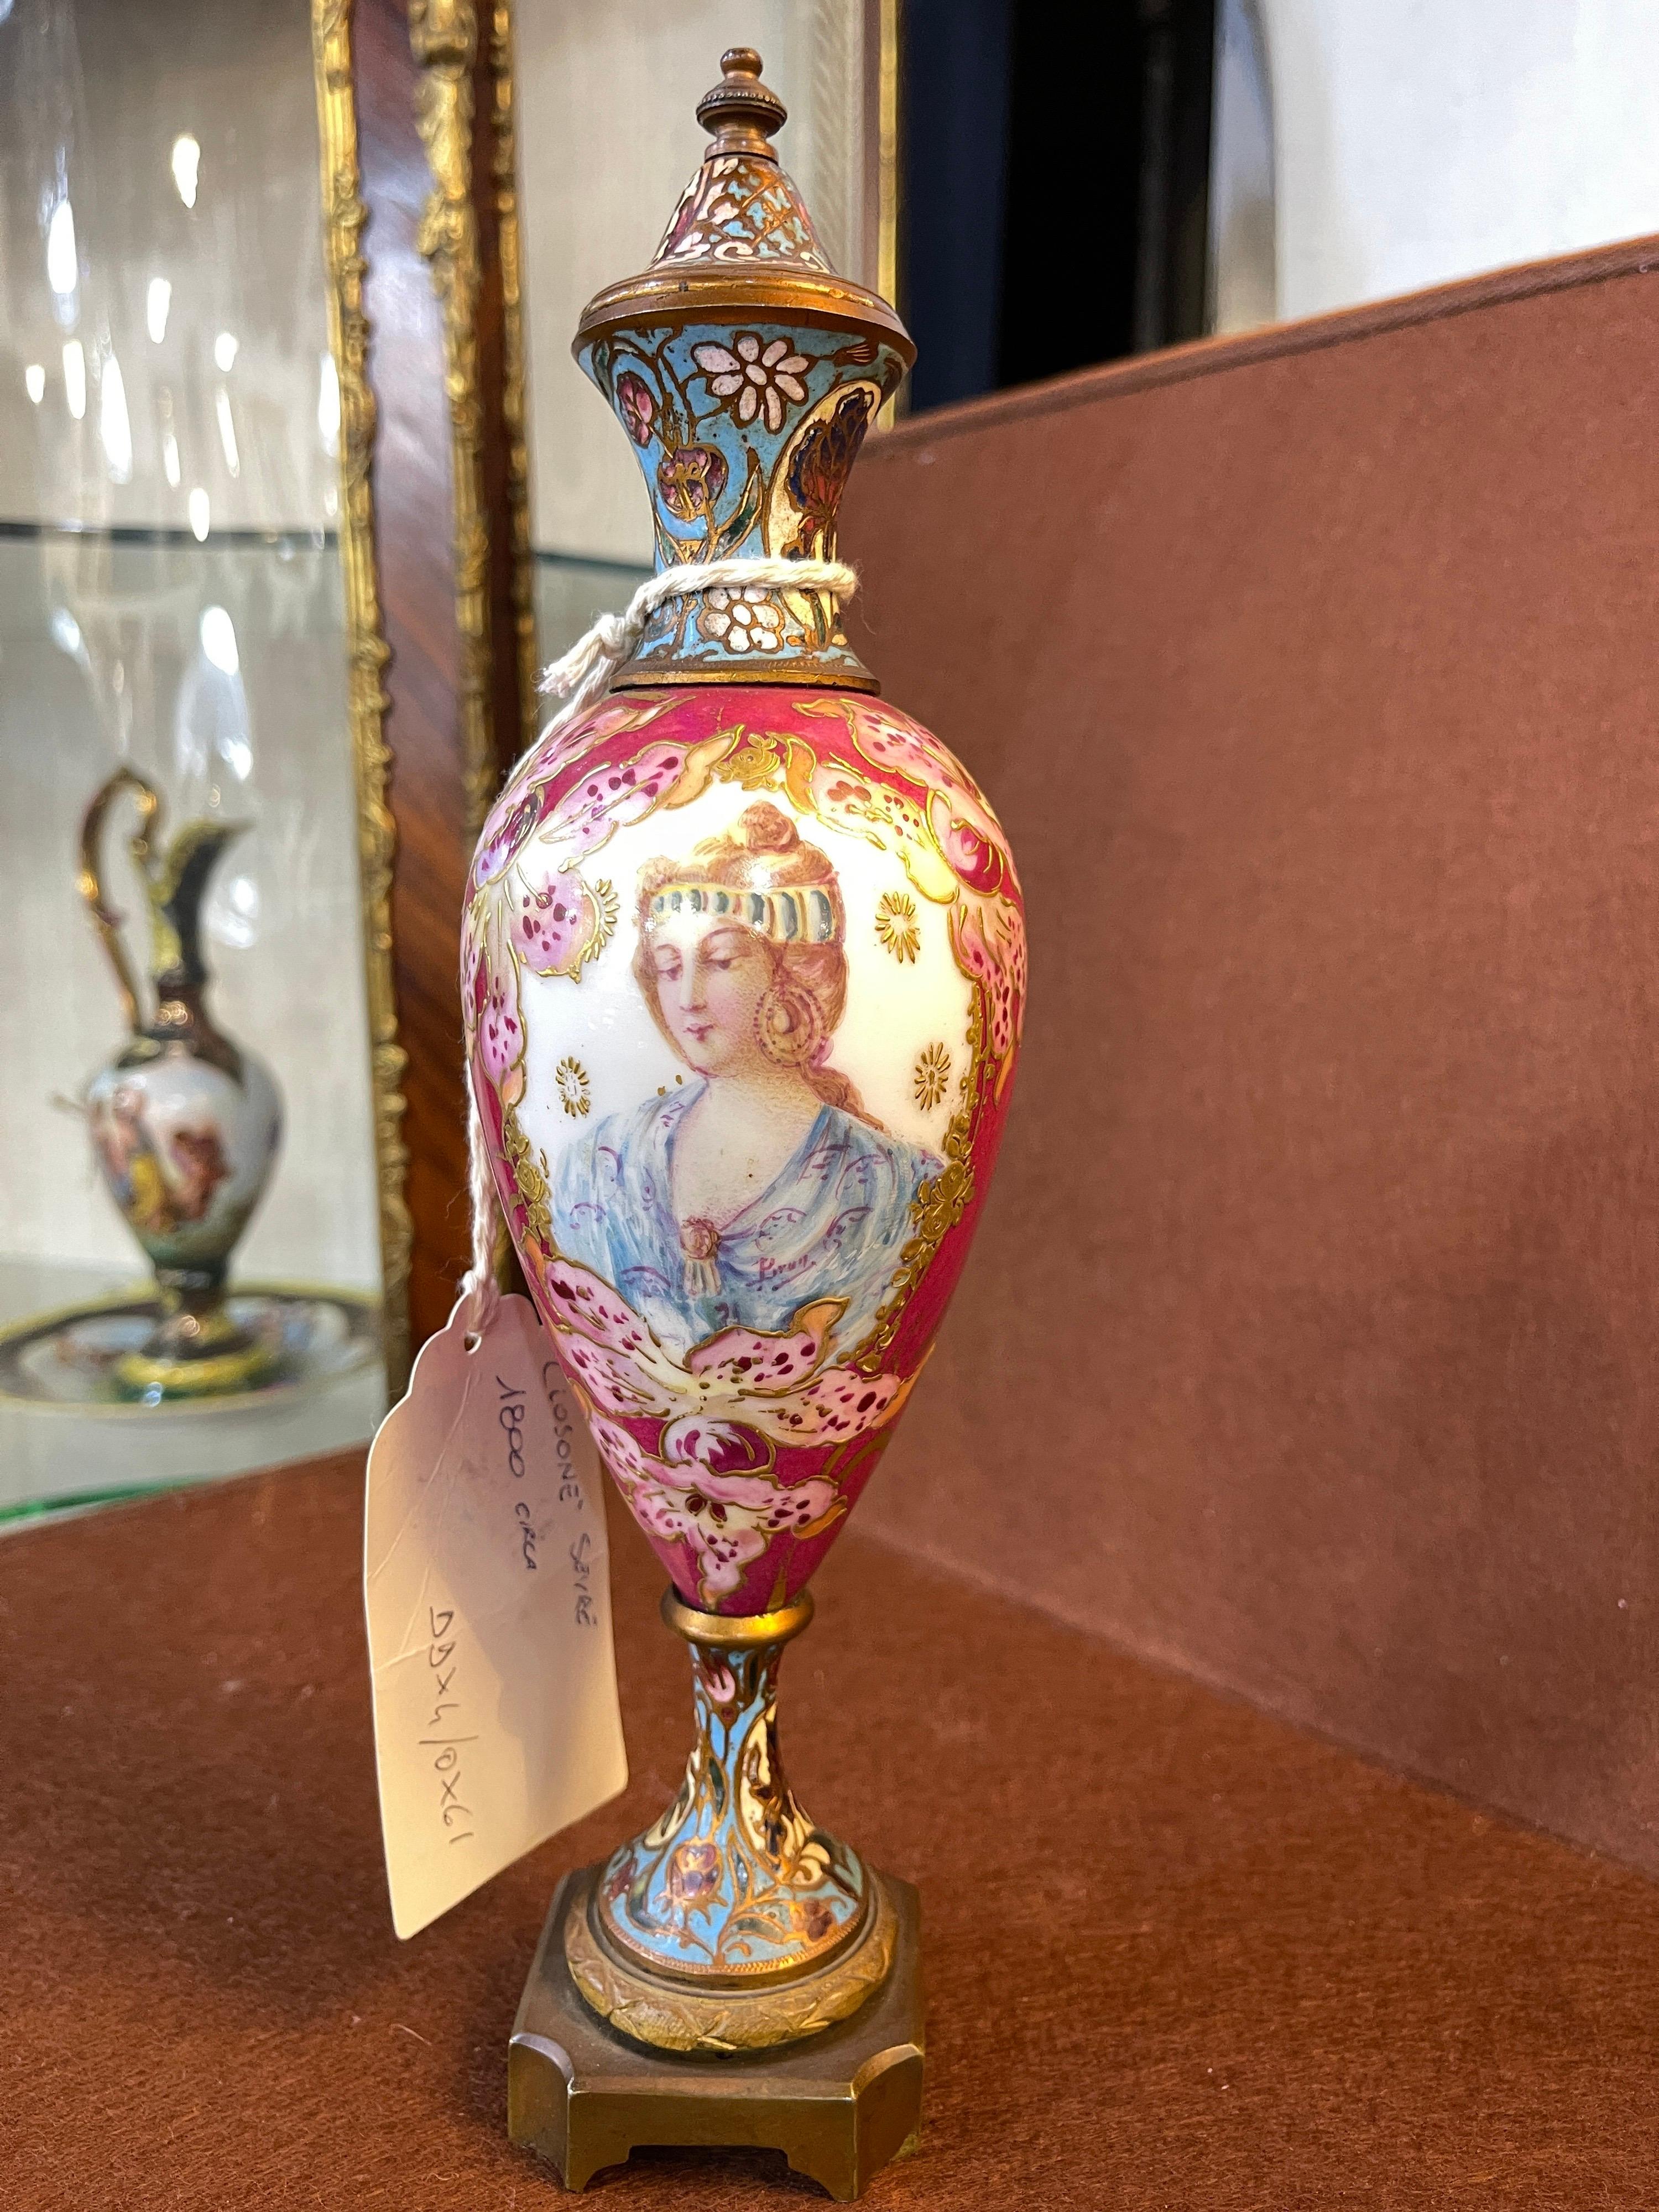 Fantastic Porcelain and Cloisonné bronze vases, France, 1880 circa ,Louis XVI revival. Beautiful painting on the front of a maiden, on the rest of the surface painted with floral motifs. Signed at lower right on the portrait of the maiden.
Cloisonnè